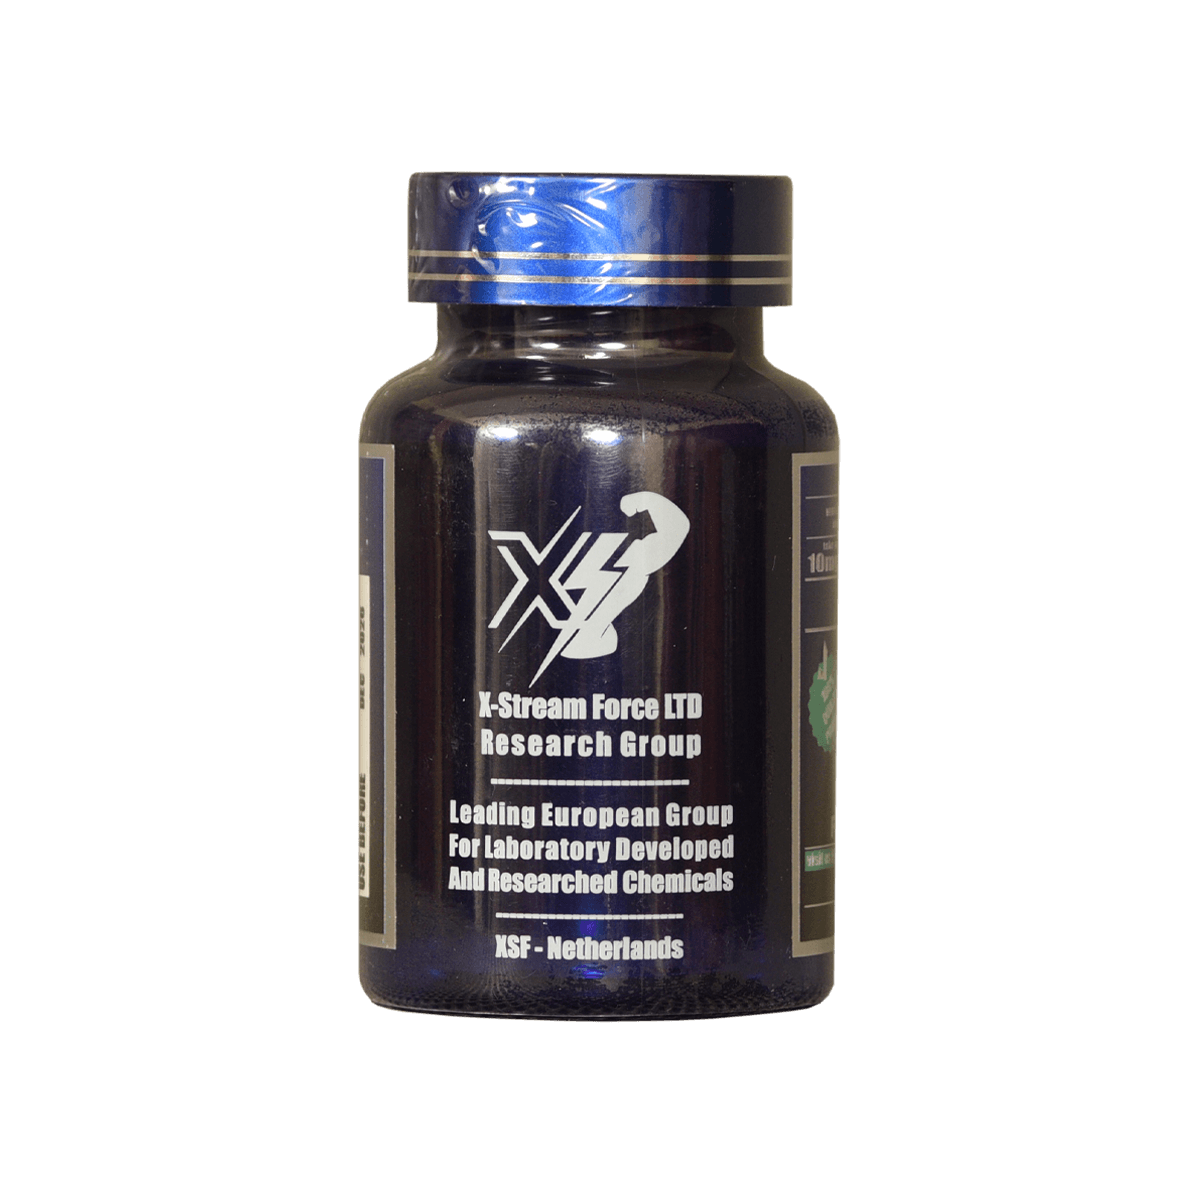 ibutamoren-mk677-capsules-sarm-900mg-muscle shop-xstreamforce-for recomp-rejuvenation-strength✦mk677 sarms✦ fitness supplements | XSF Store